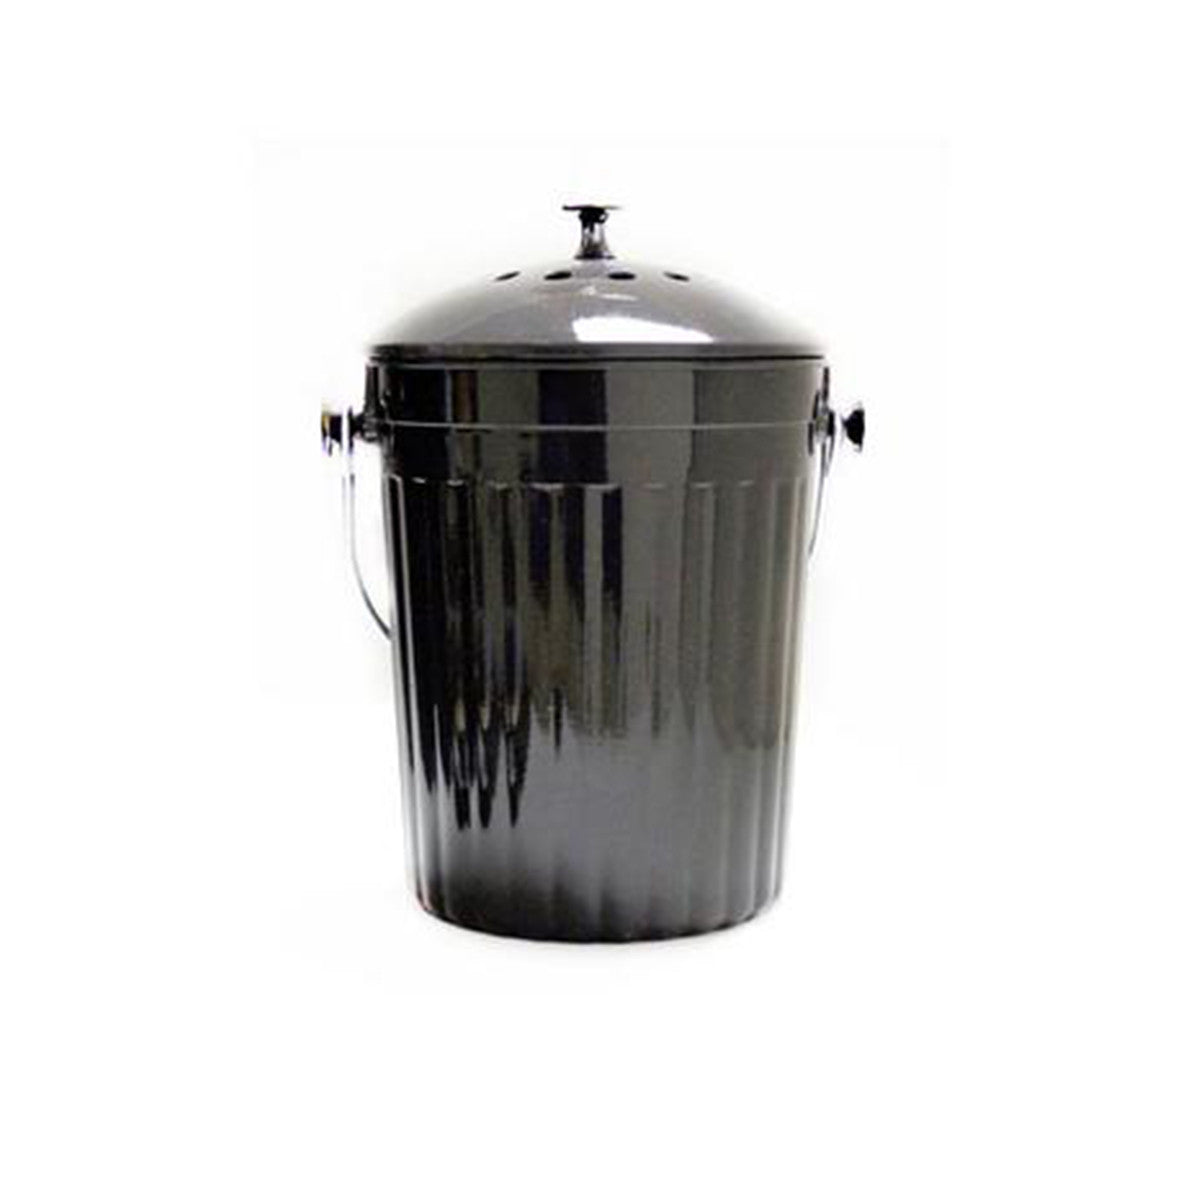 RW Clean 1 gal Stainless Steel Compost Bin - Charcoal Filter - 7 1/4